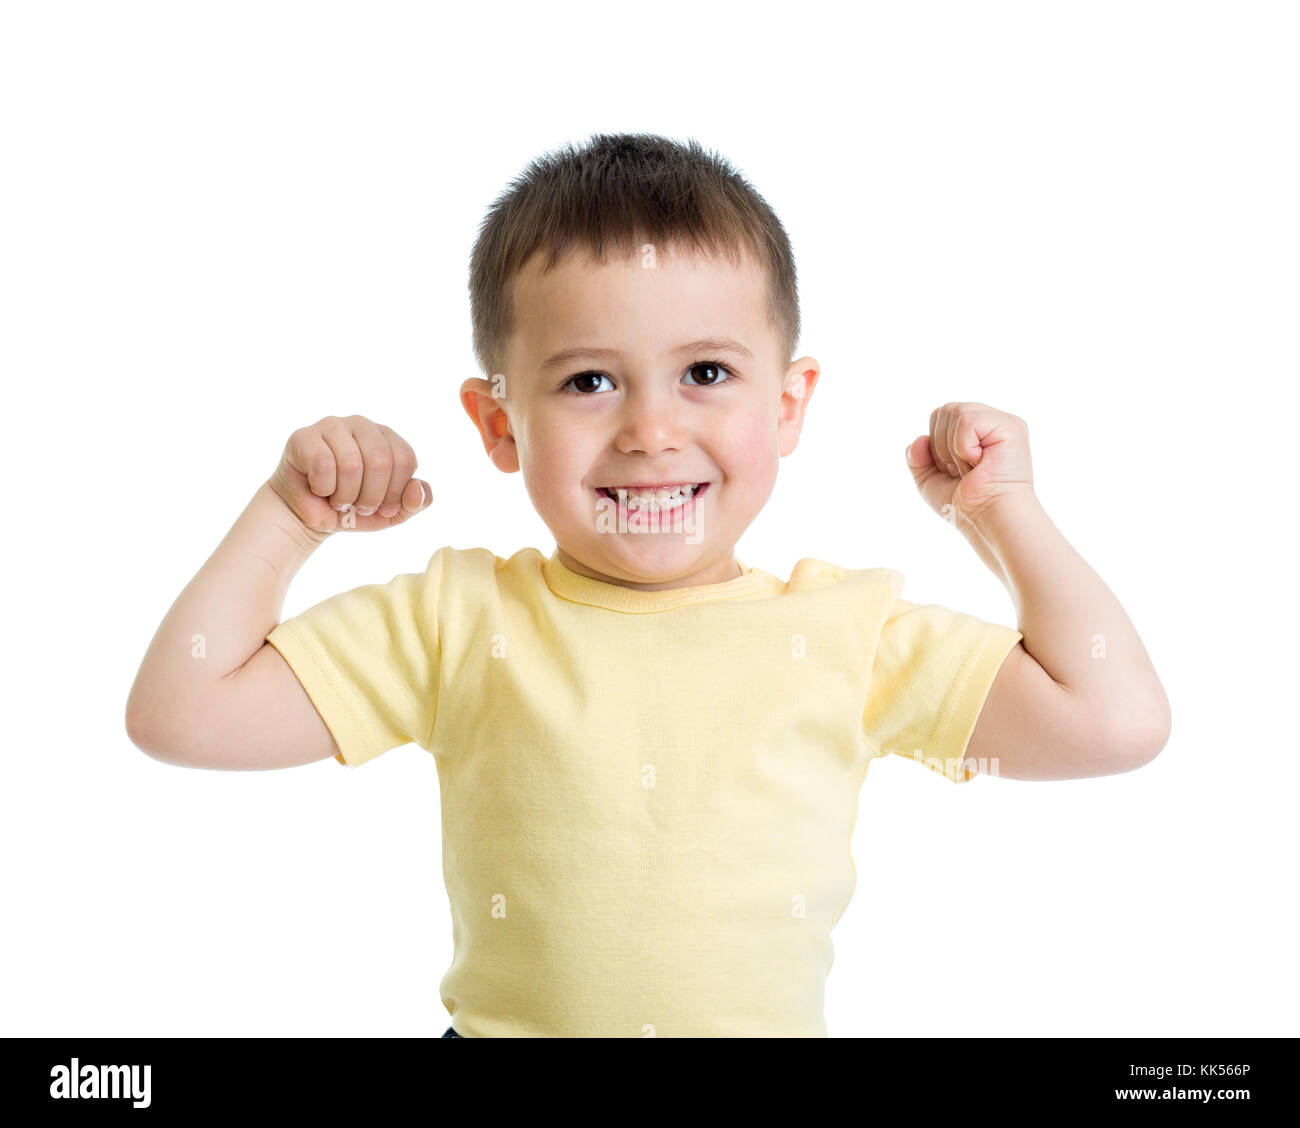 Portrait of cute kid showing the muscles of his arms, isolated on white Stock Photo